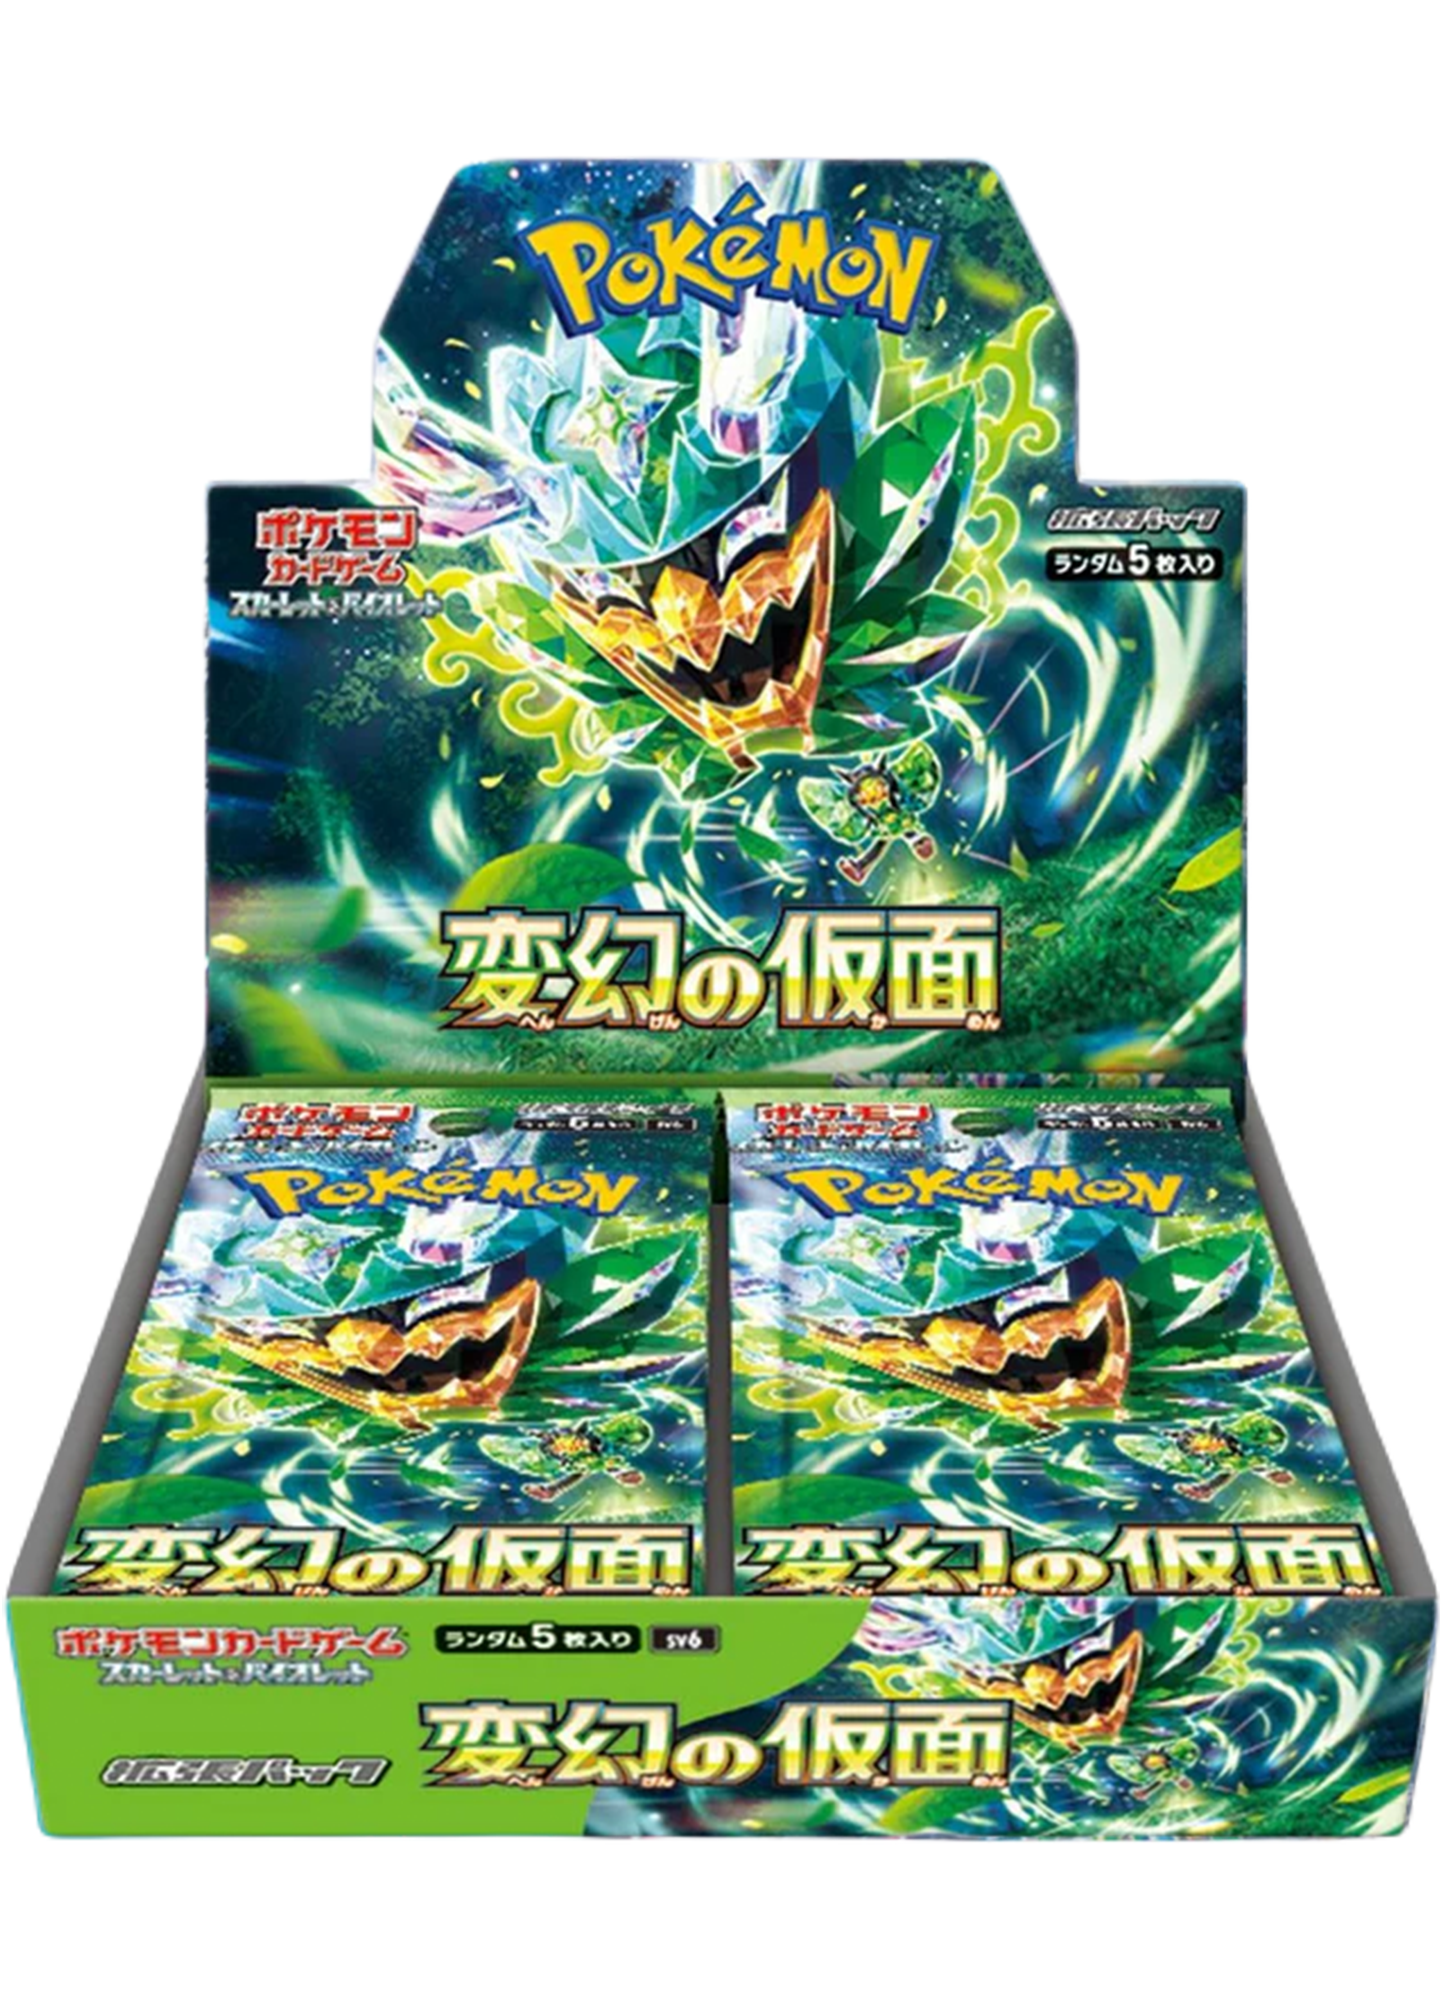 Mask of Change - Booster Box - Japanese